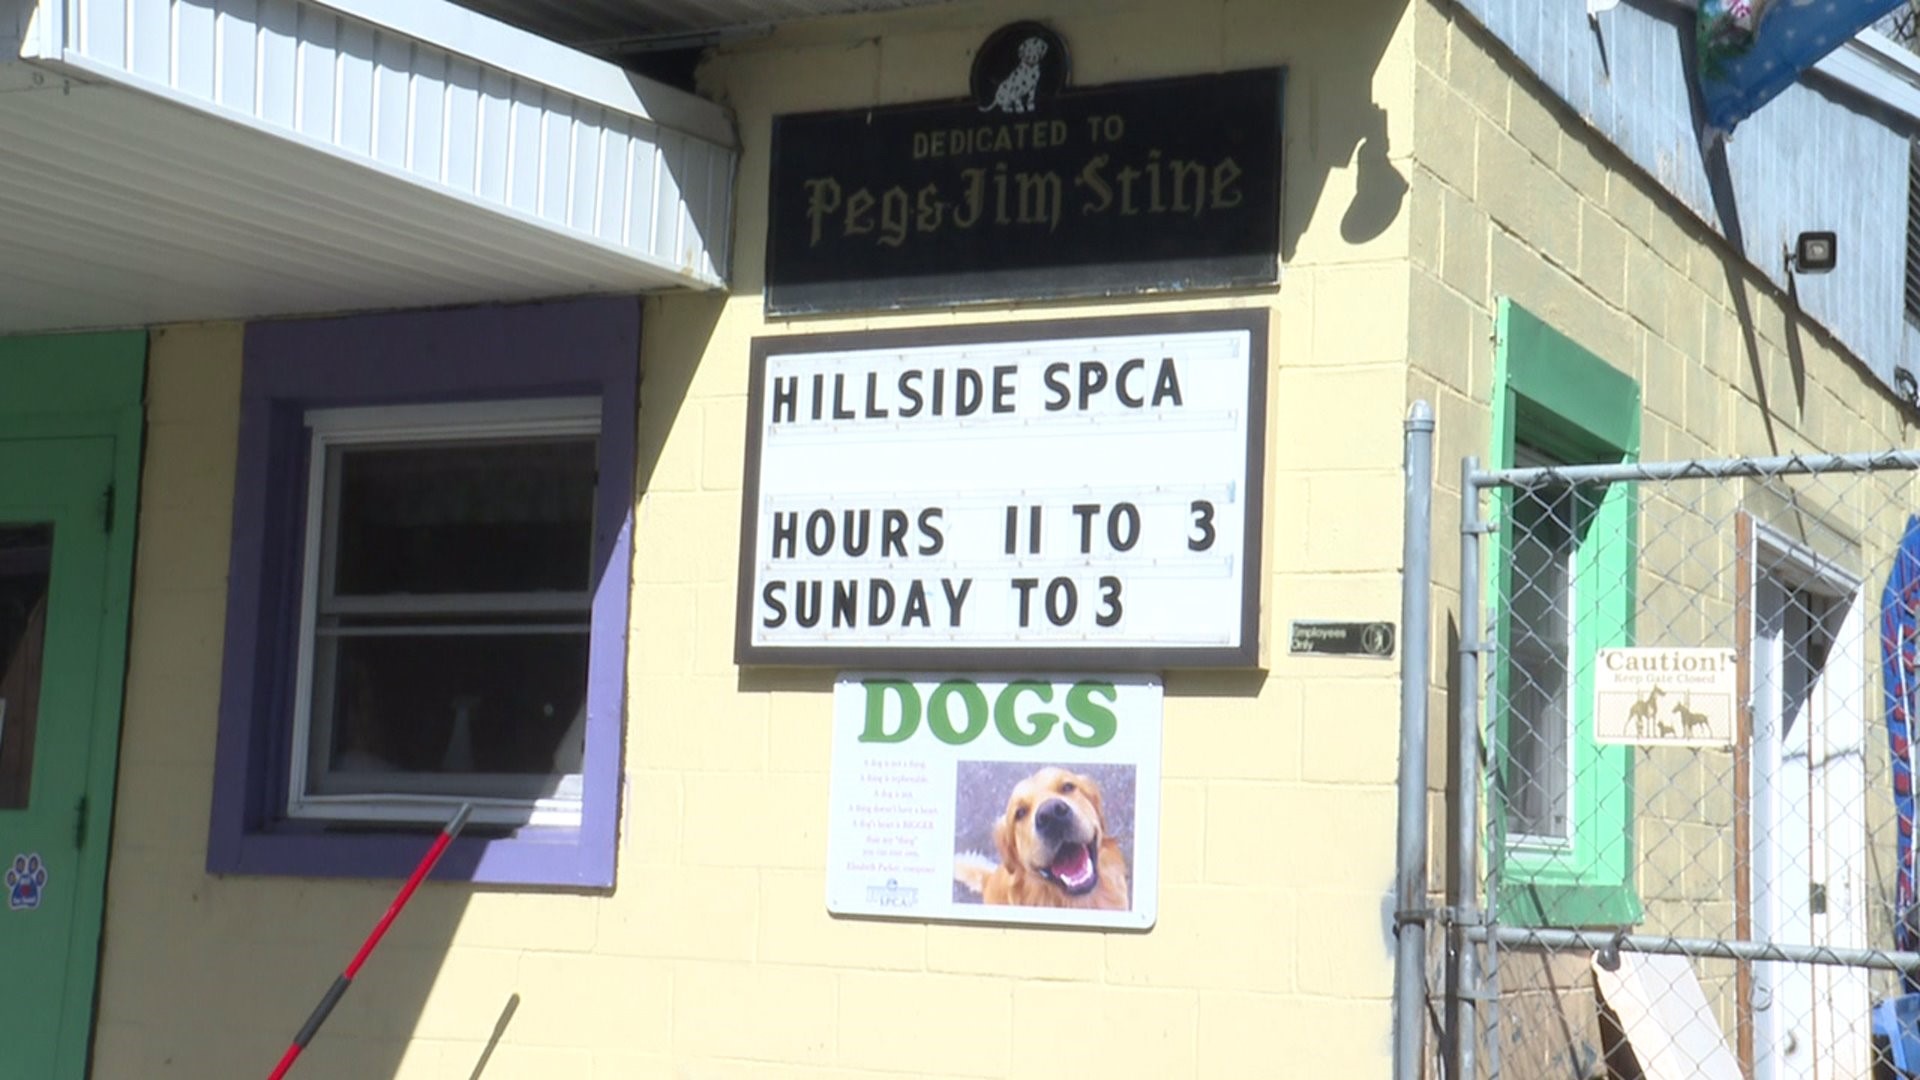 An animal shelter in Schuylkill County is responding to criticism that they mistreat animals. Employees say the accusations are unjustified and cruel.